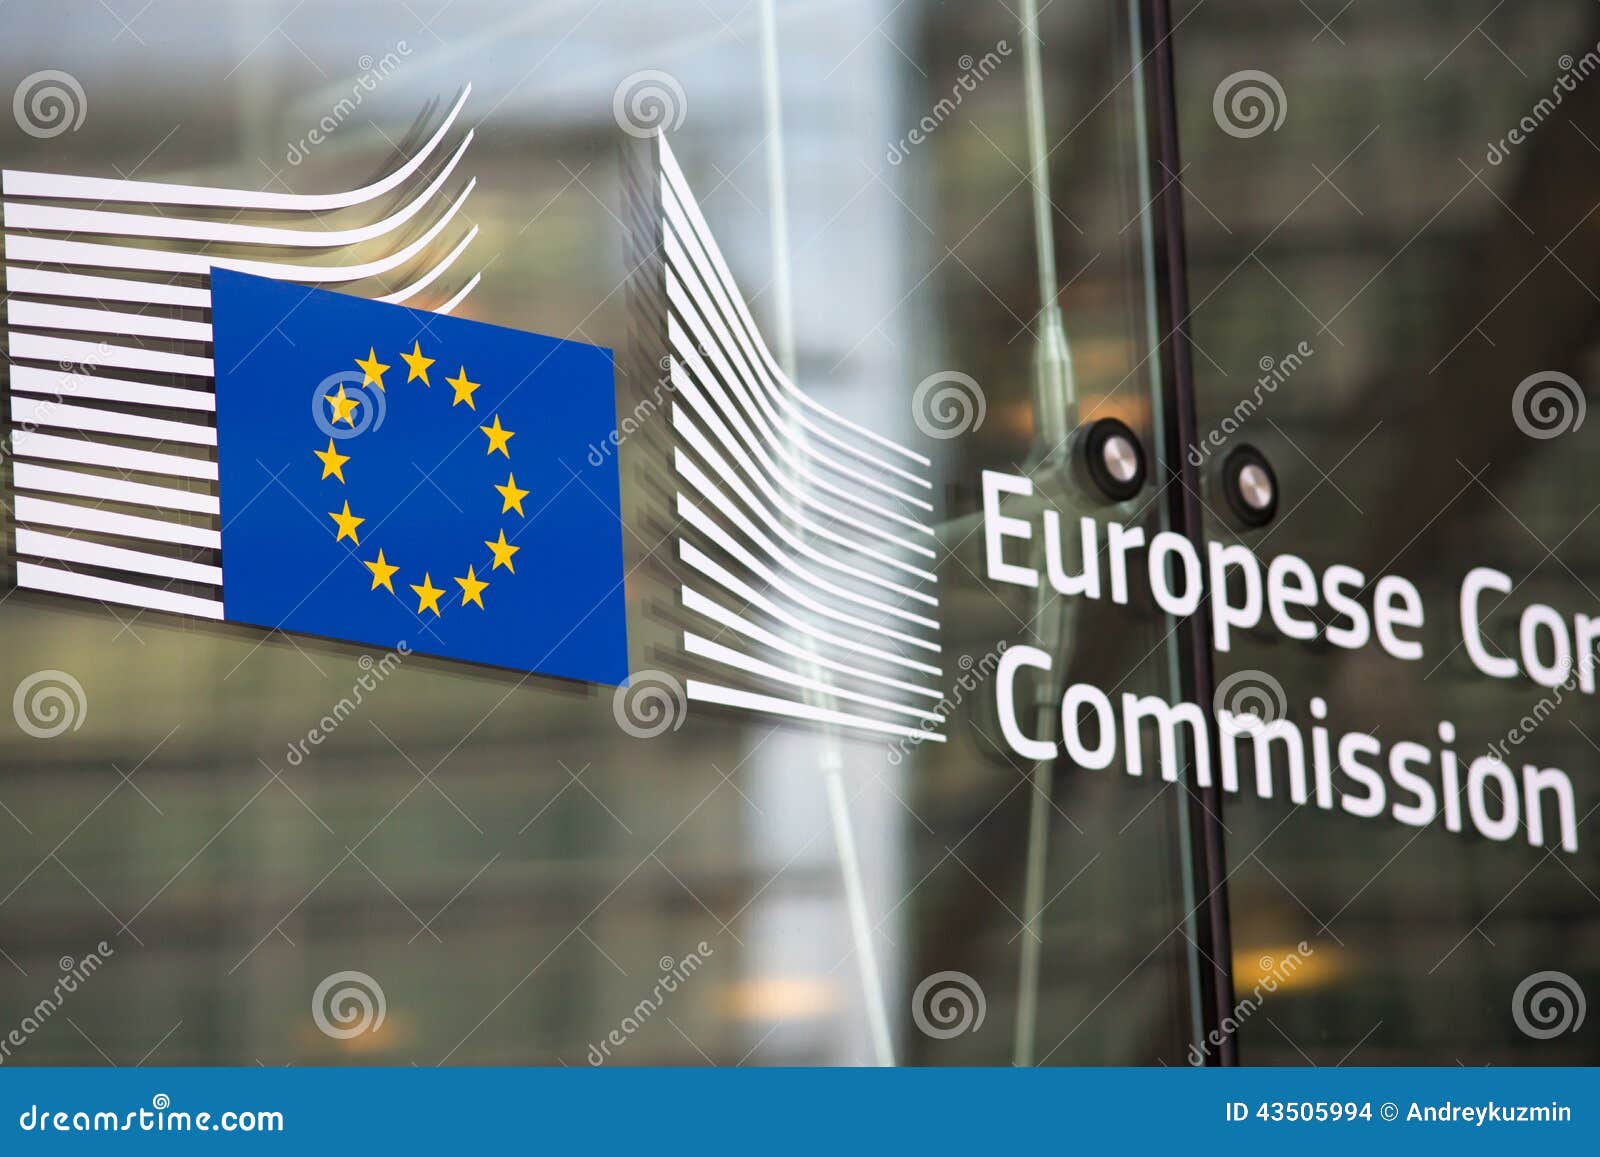 european commission official entry